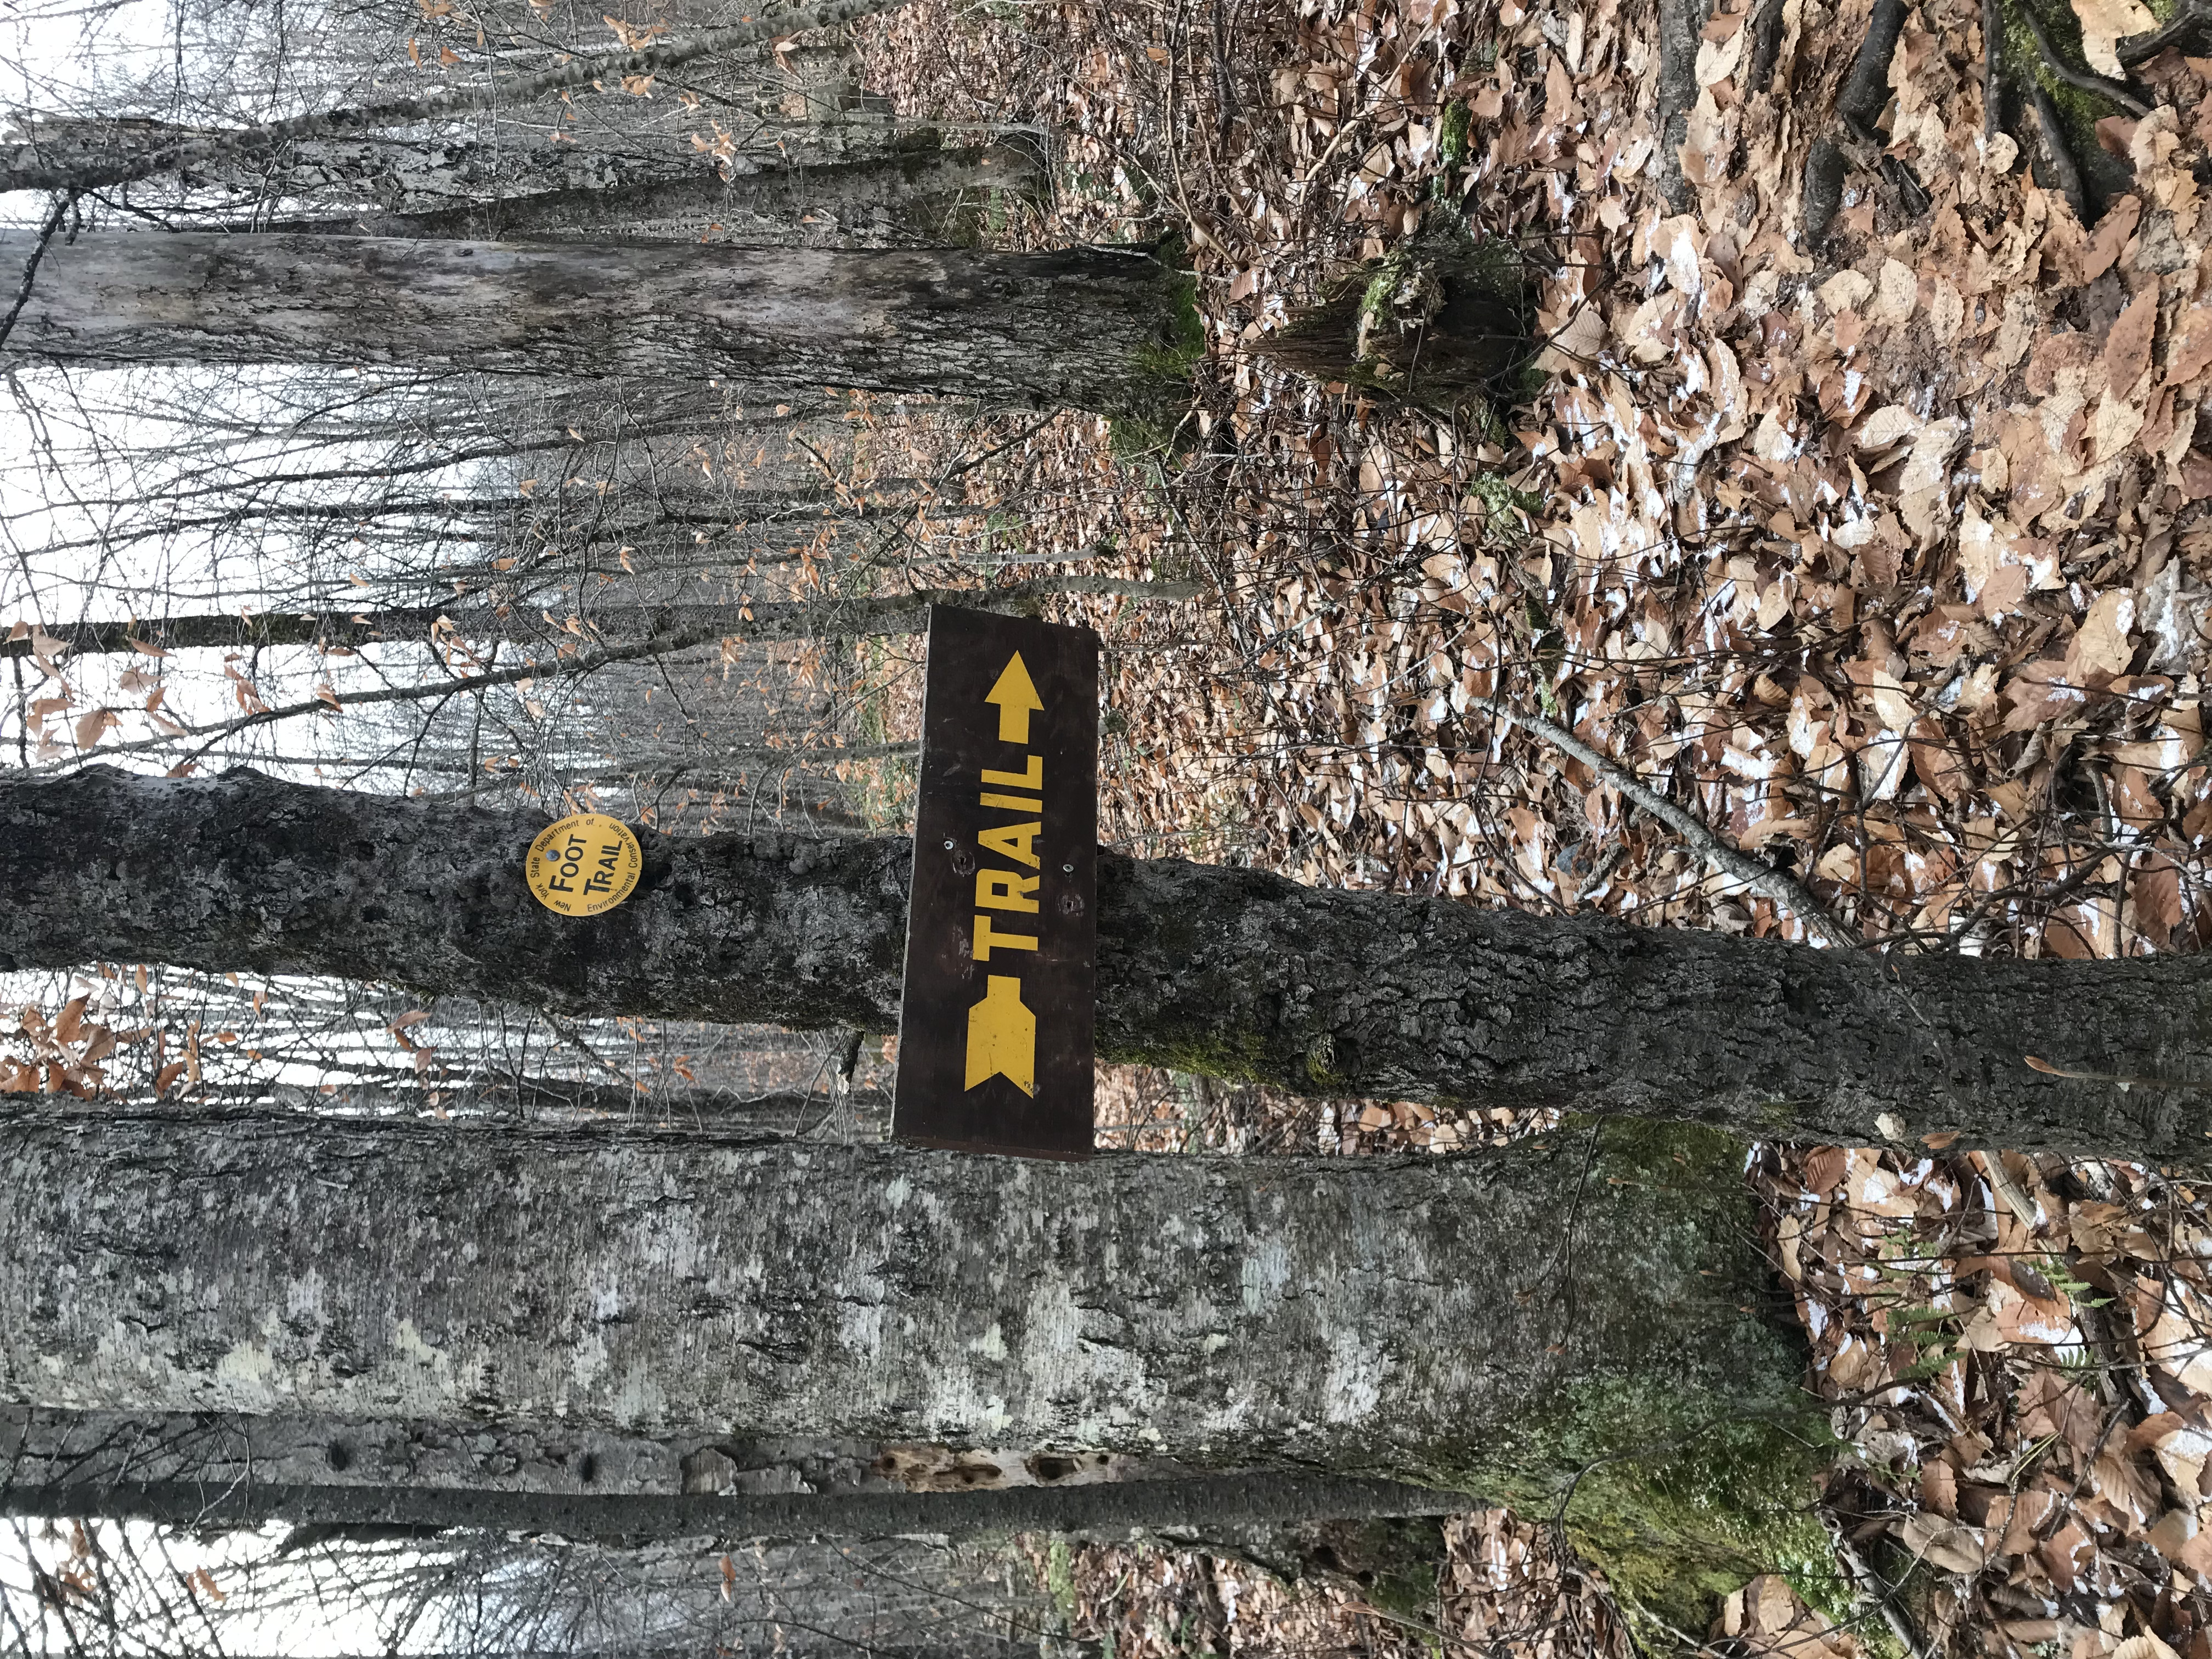 Yellow trail markers for Moxham Mountain